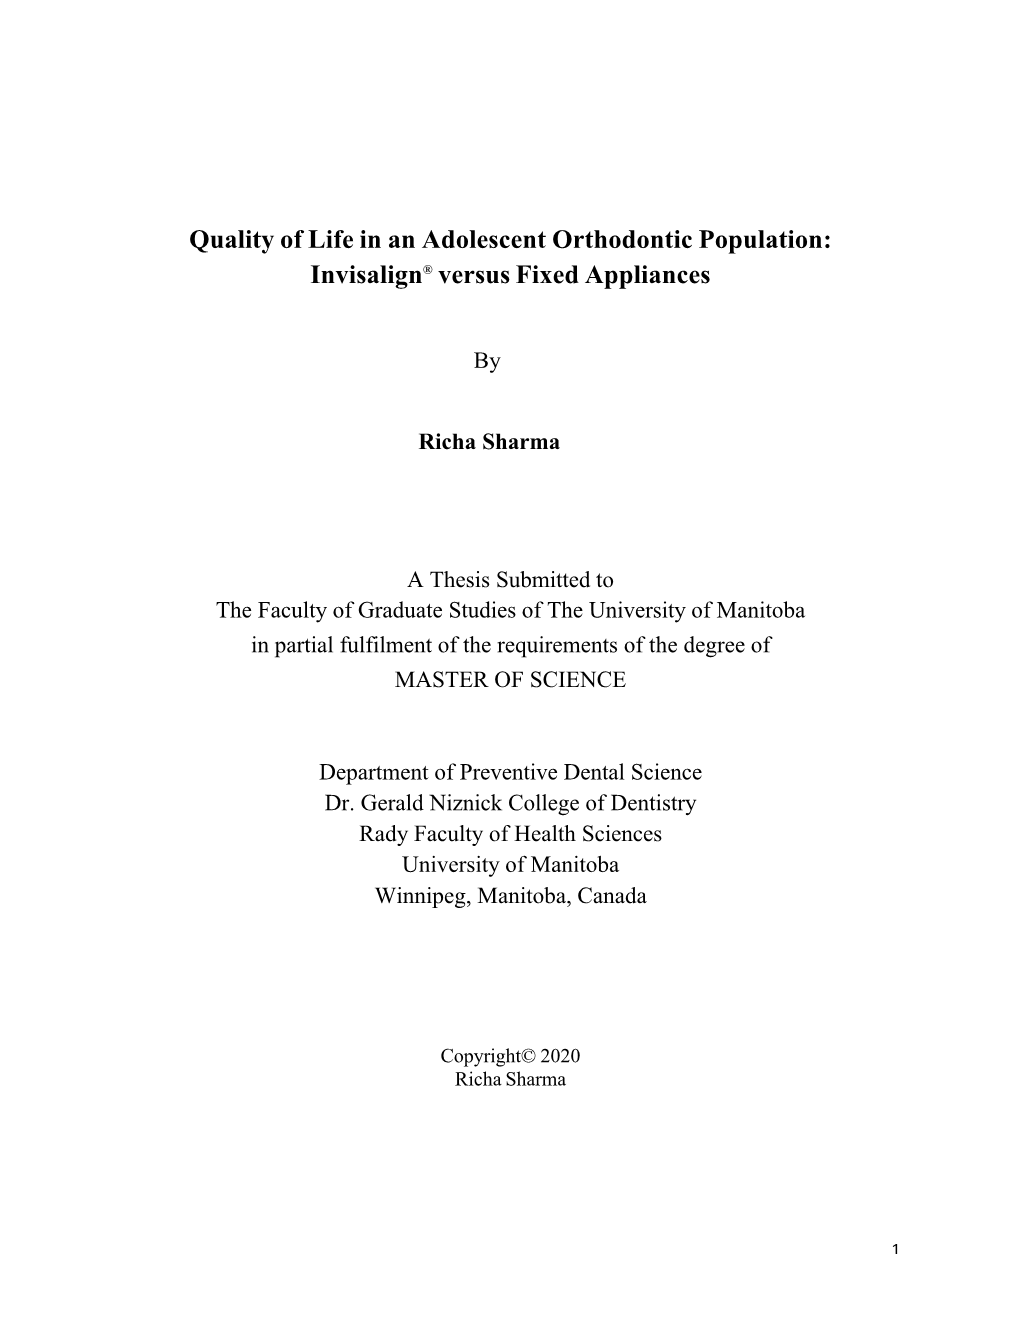 Quality of Life in an Adolescent Orthodontic Population: Invisalign® Versus Fixed Appliances